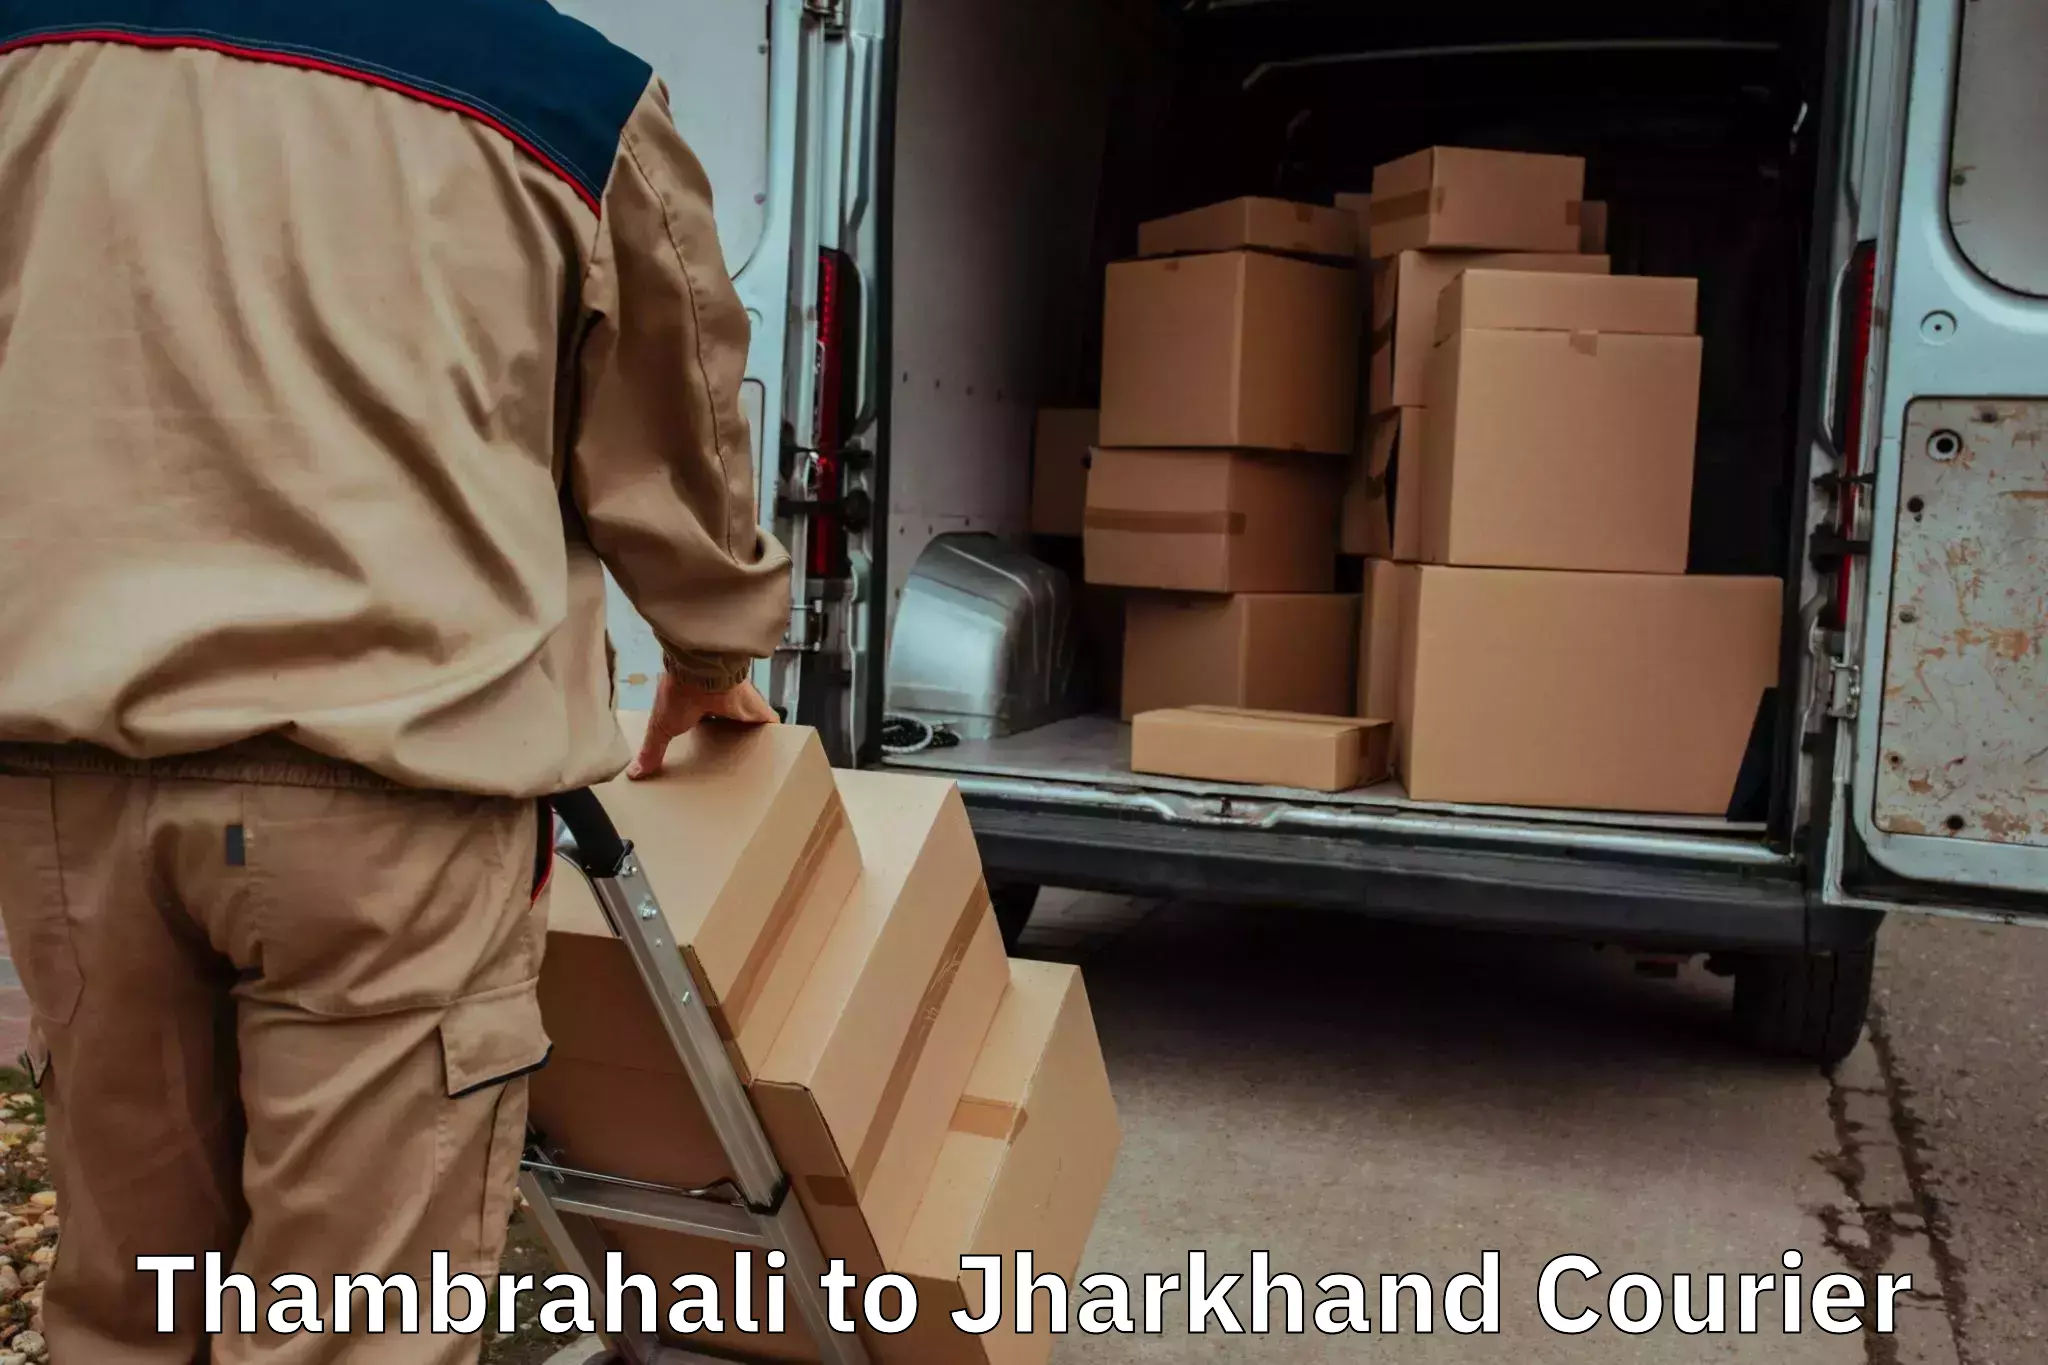 Furniture transport specialists Thambrahali to Peterbar